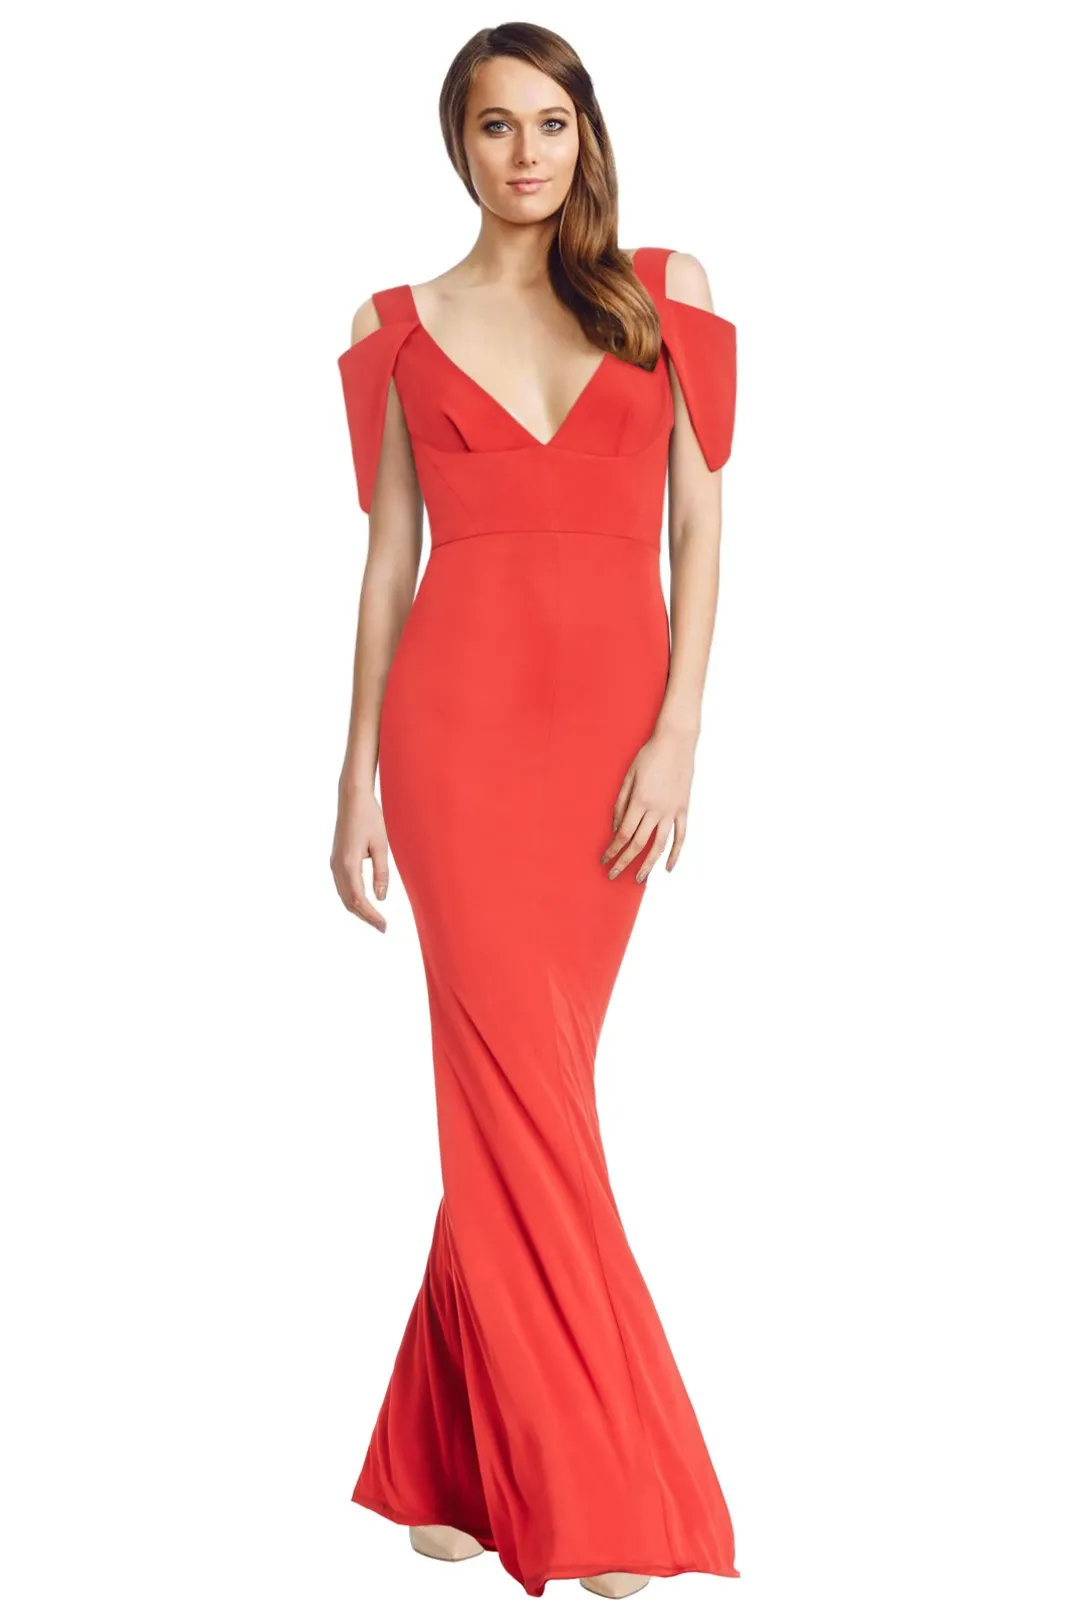 Triangle Sleeve Deep V Neck Gown by ABS by Allen Schwartz for formal events